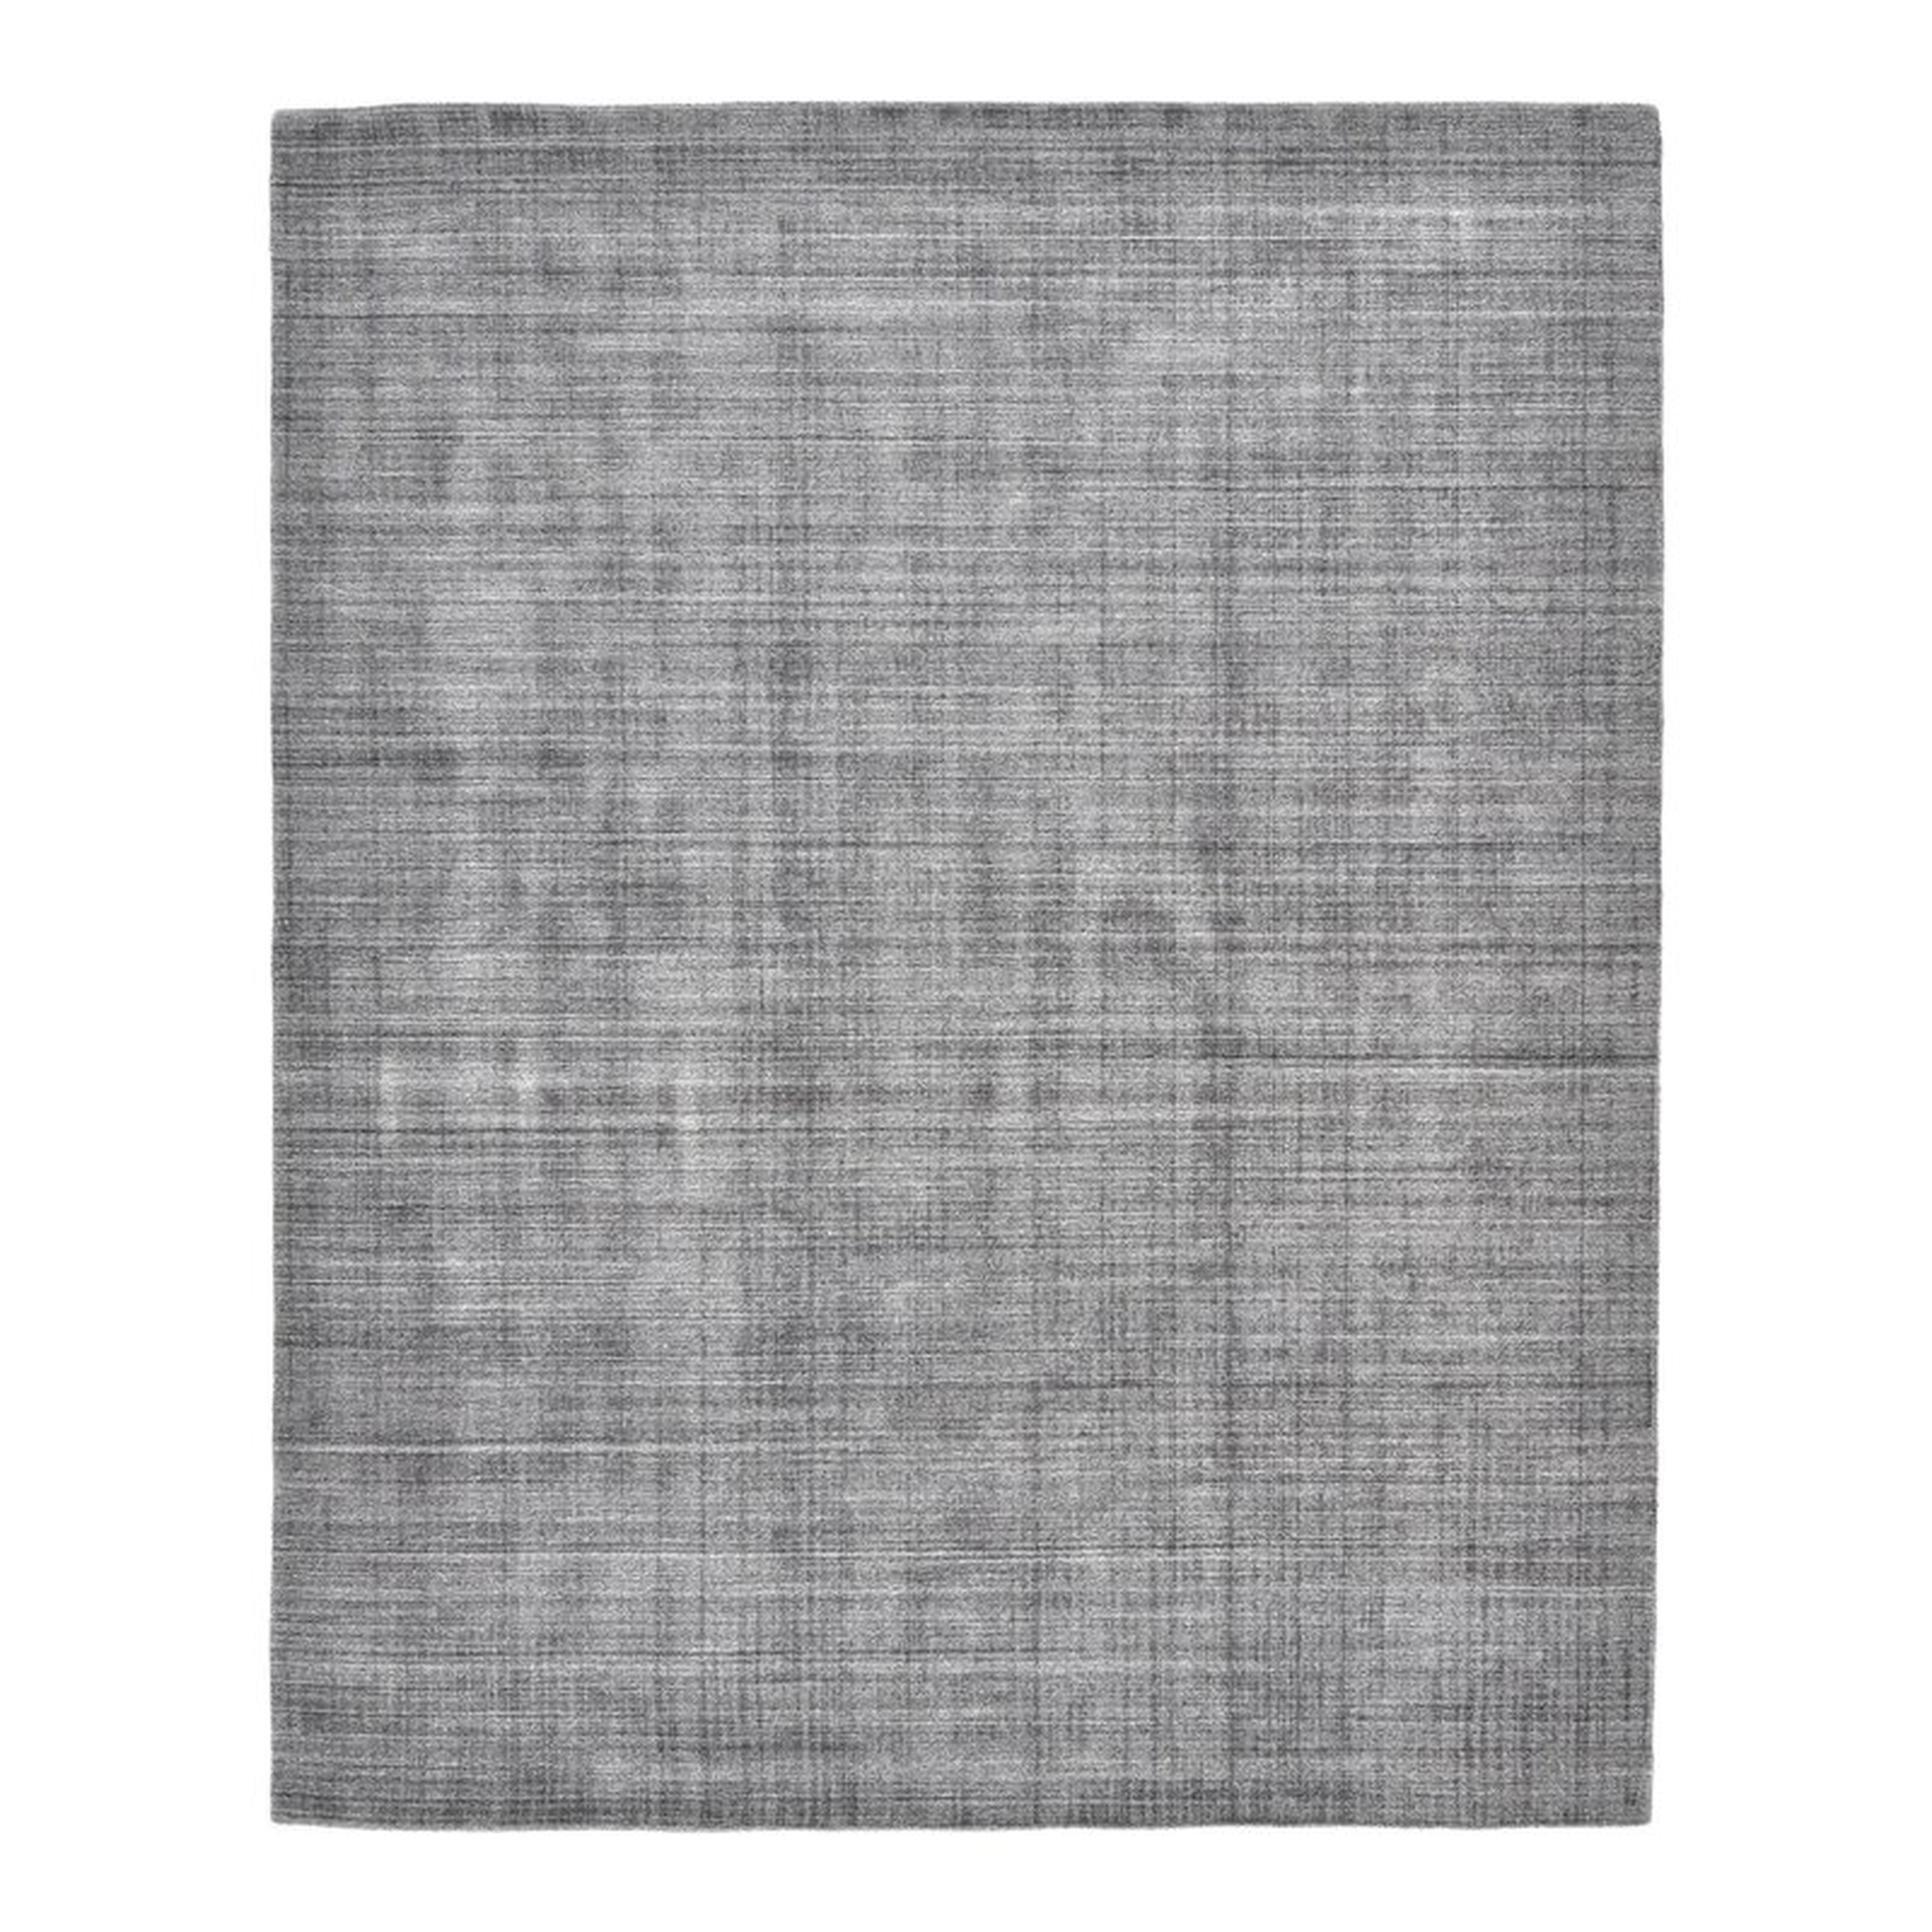 Solo Rugs Solo Rugs Ashton Loom Knotted Wool Area Rug, Dark Gray, 8 x 10 - Perigold